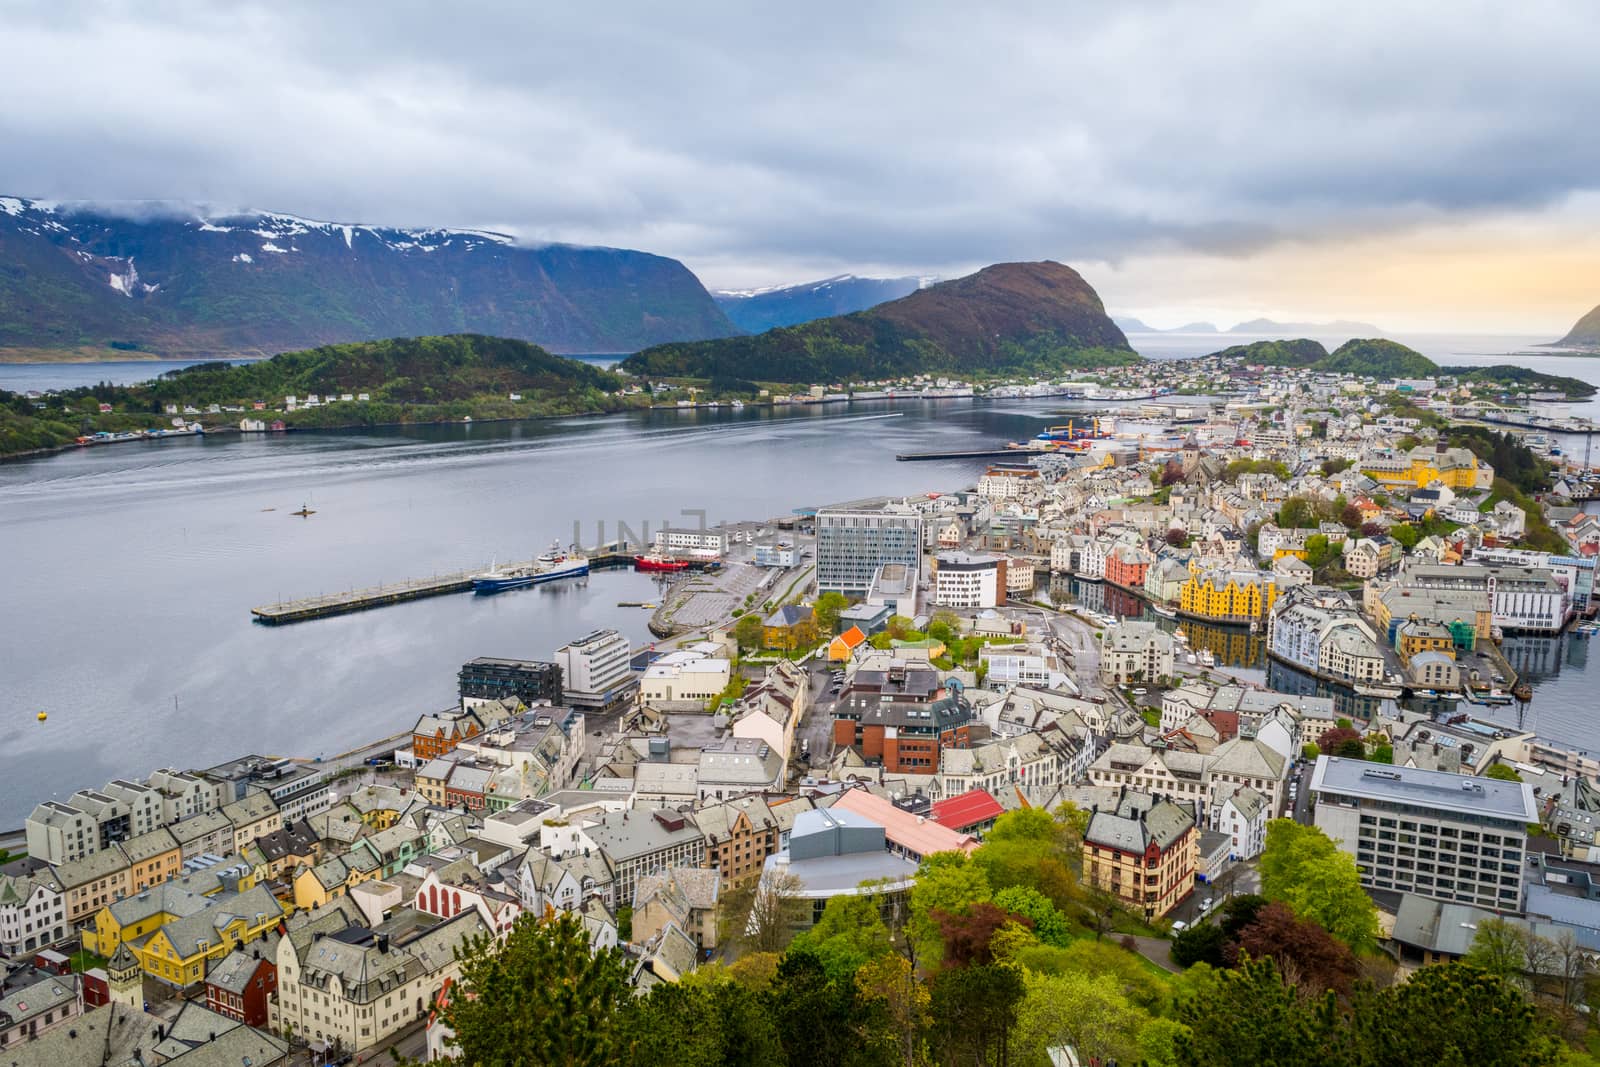 Skyline and cityscape of Alesund, Norway, on a cloudy day. Ocean bay in the background, bright houses and architecture in the foreground. Aerial view. by kb79